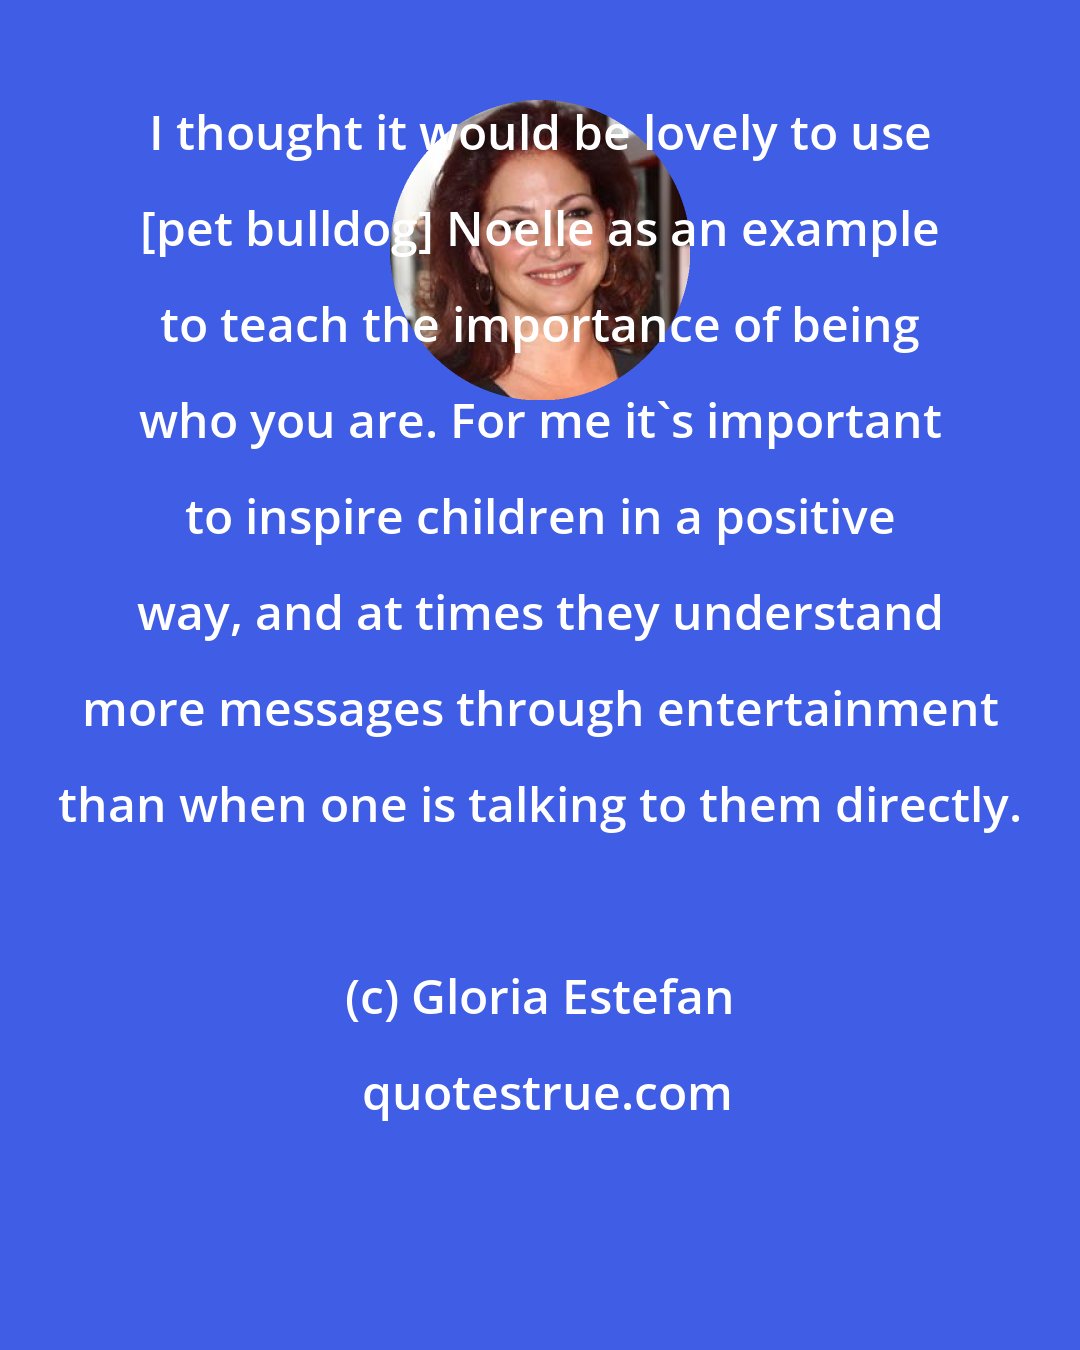 Gloria Estefan: I thought it would be lovely to use [pet bulldog] Noelle as an example to teach the importance of being who you are. For me it's important to inspire children in a positive way, and at times they understand more messages through entertainment than when one is talking to them directly.